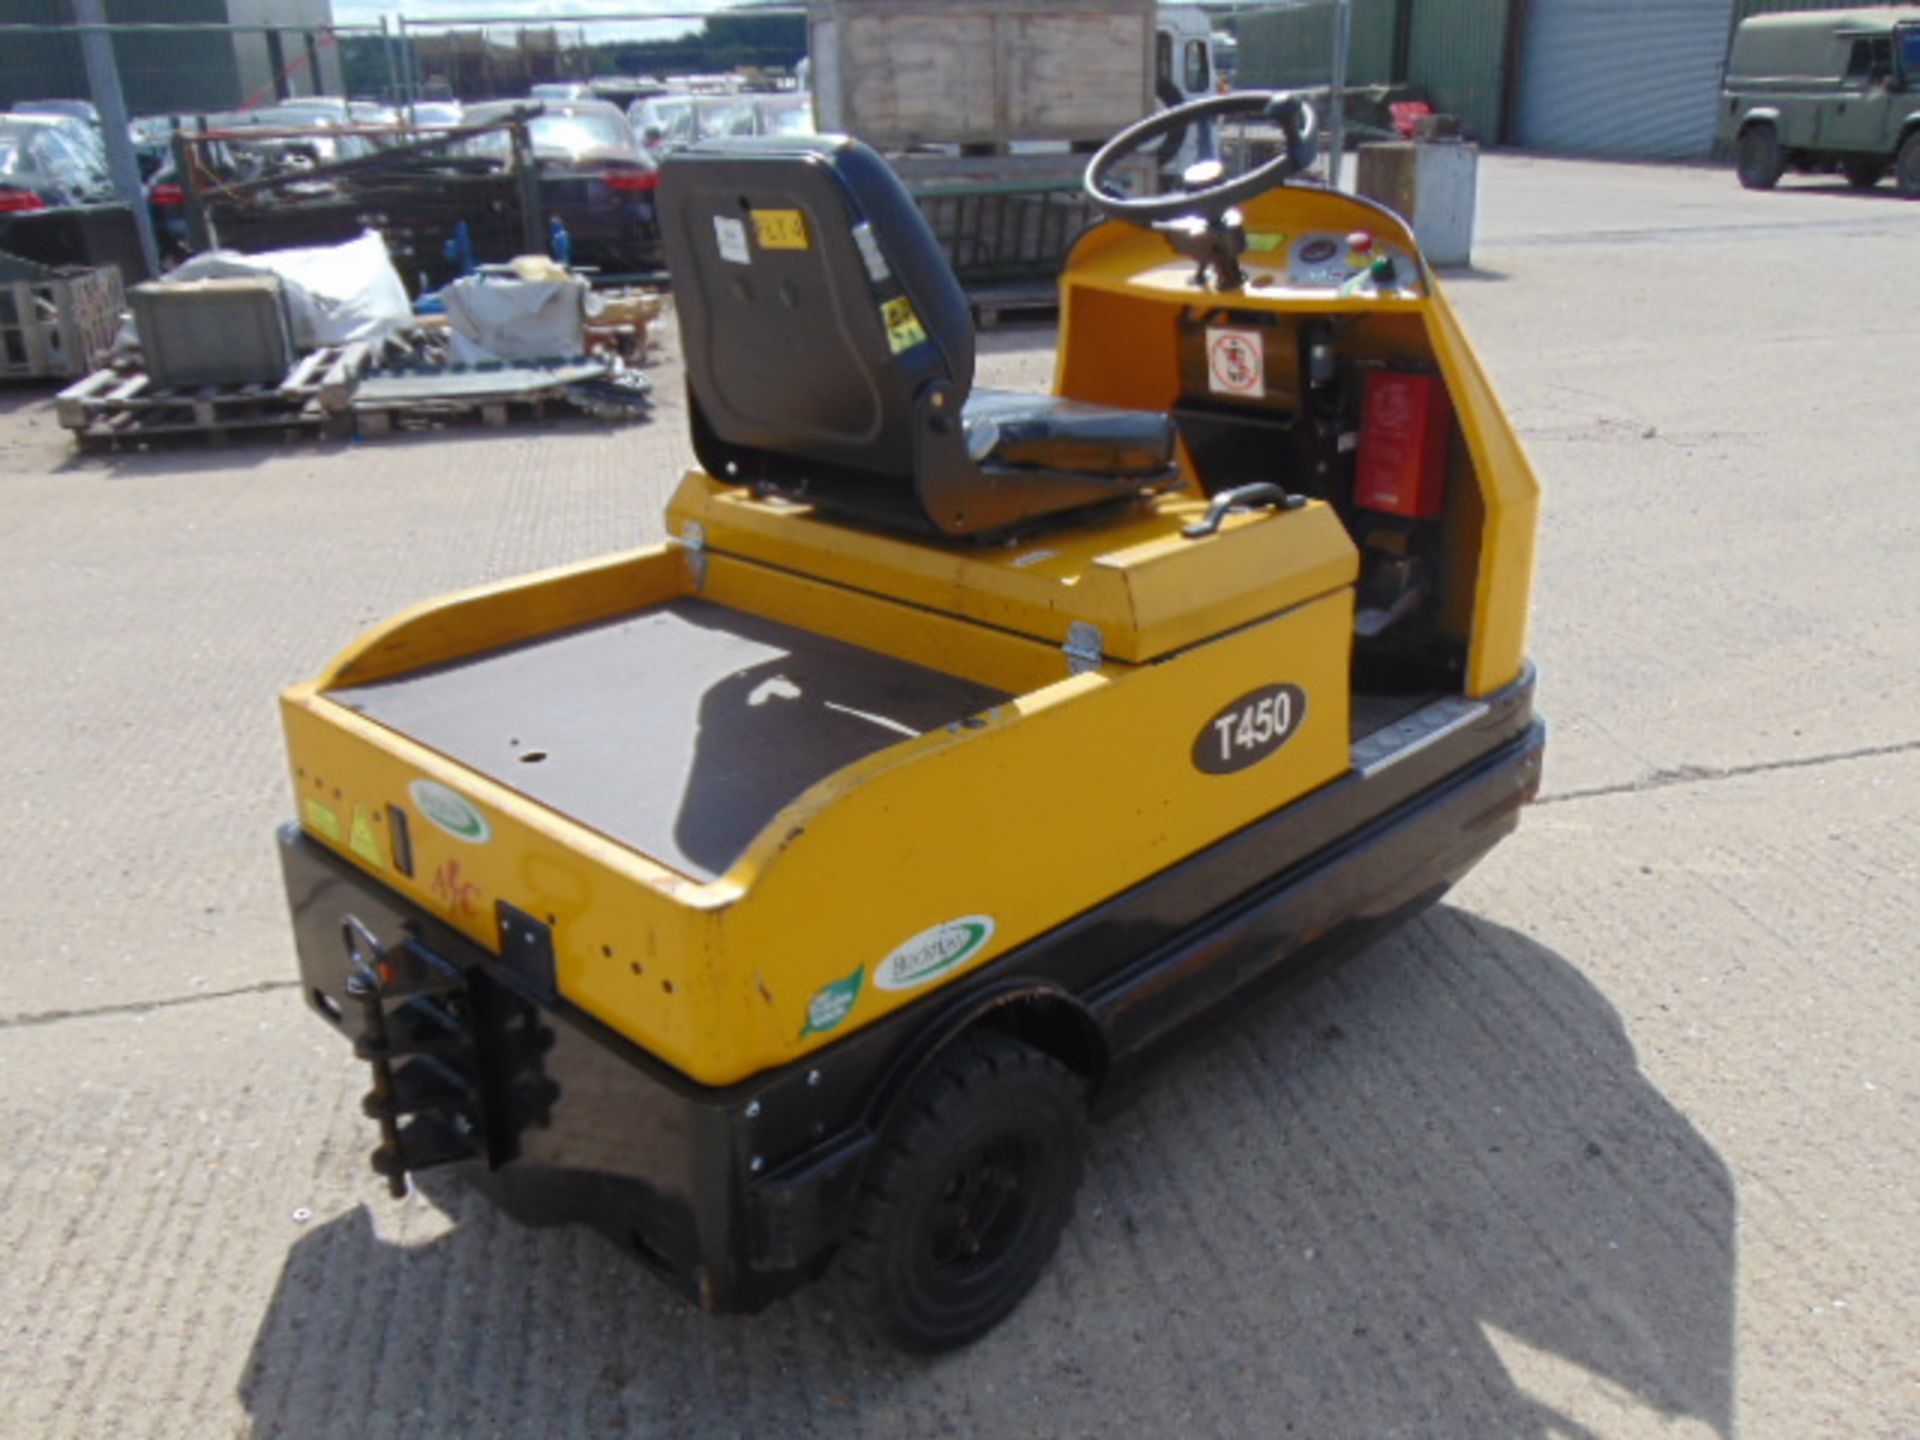 2013 Bradshaw T450 Electric Tow Tractor - Image 6 of 20